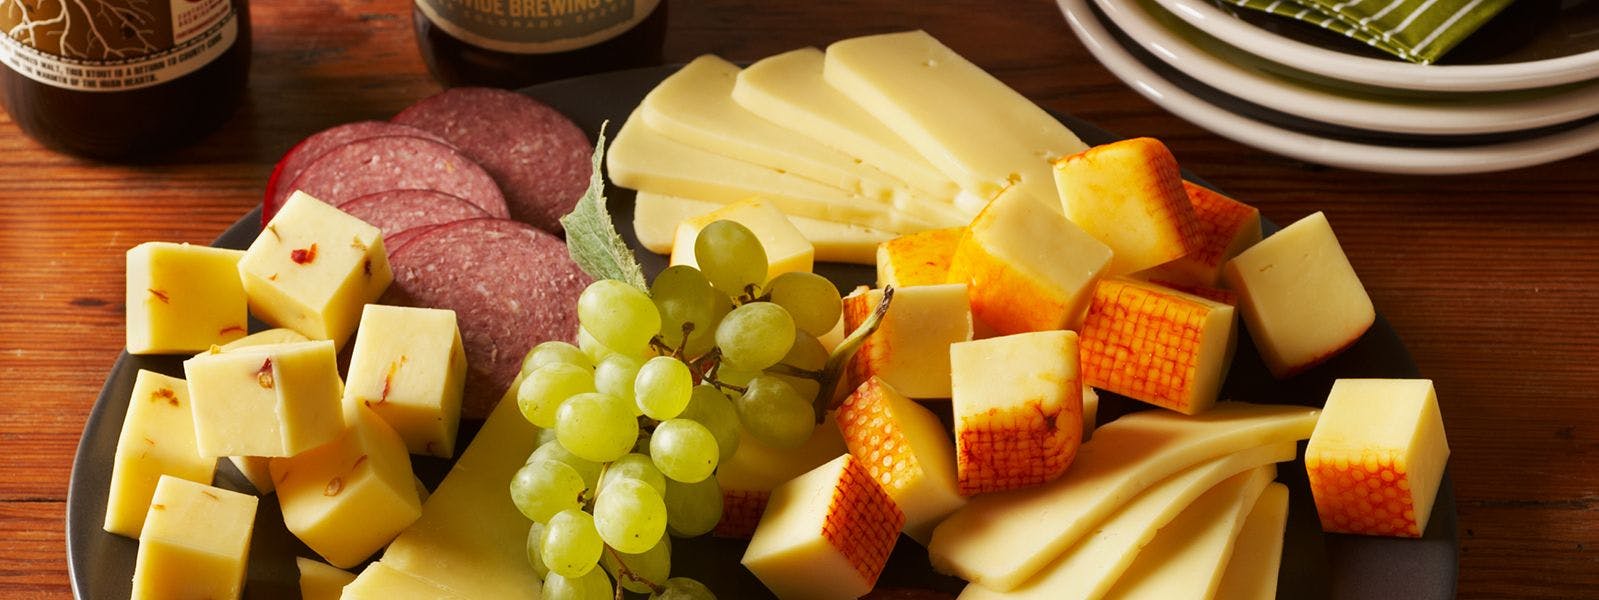 Organic Valley cheese tray with summer sausage and grapes